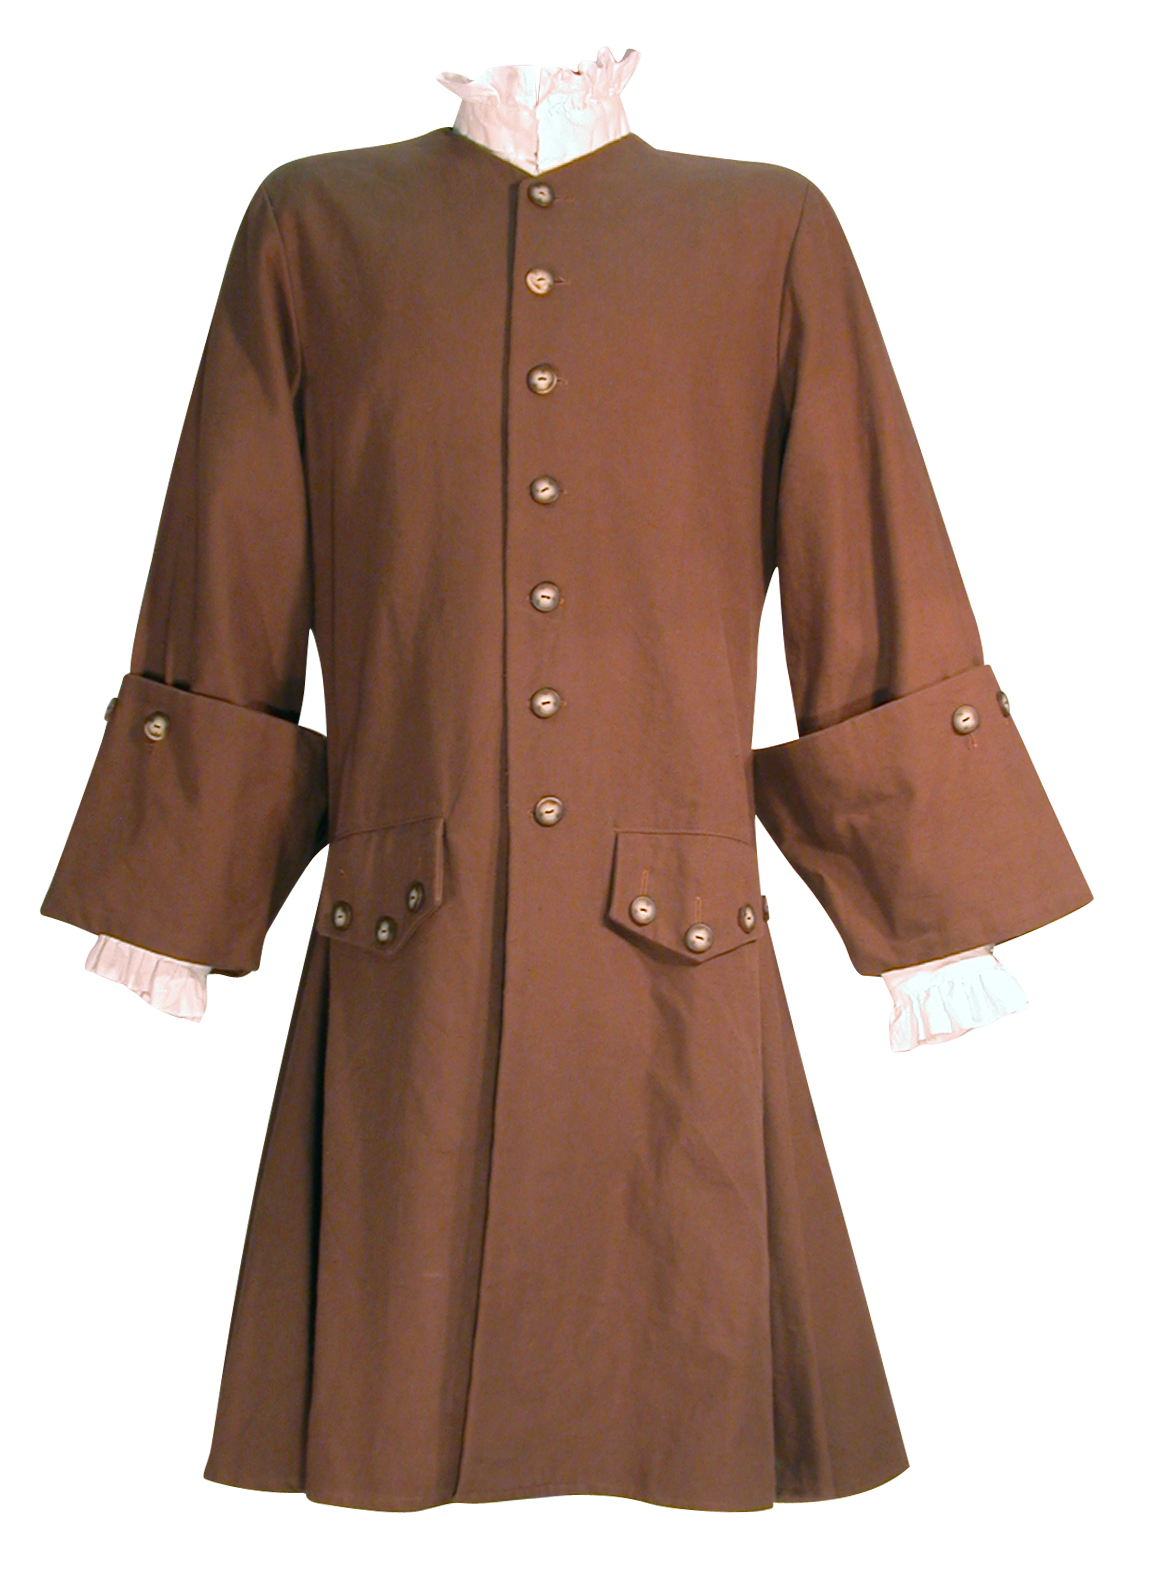 Pirate Coat by White Pavilion, front view. This coat is ideal for pirate costumes, colonial costumes, French & Indian War or Revolutionary War costumes.